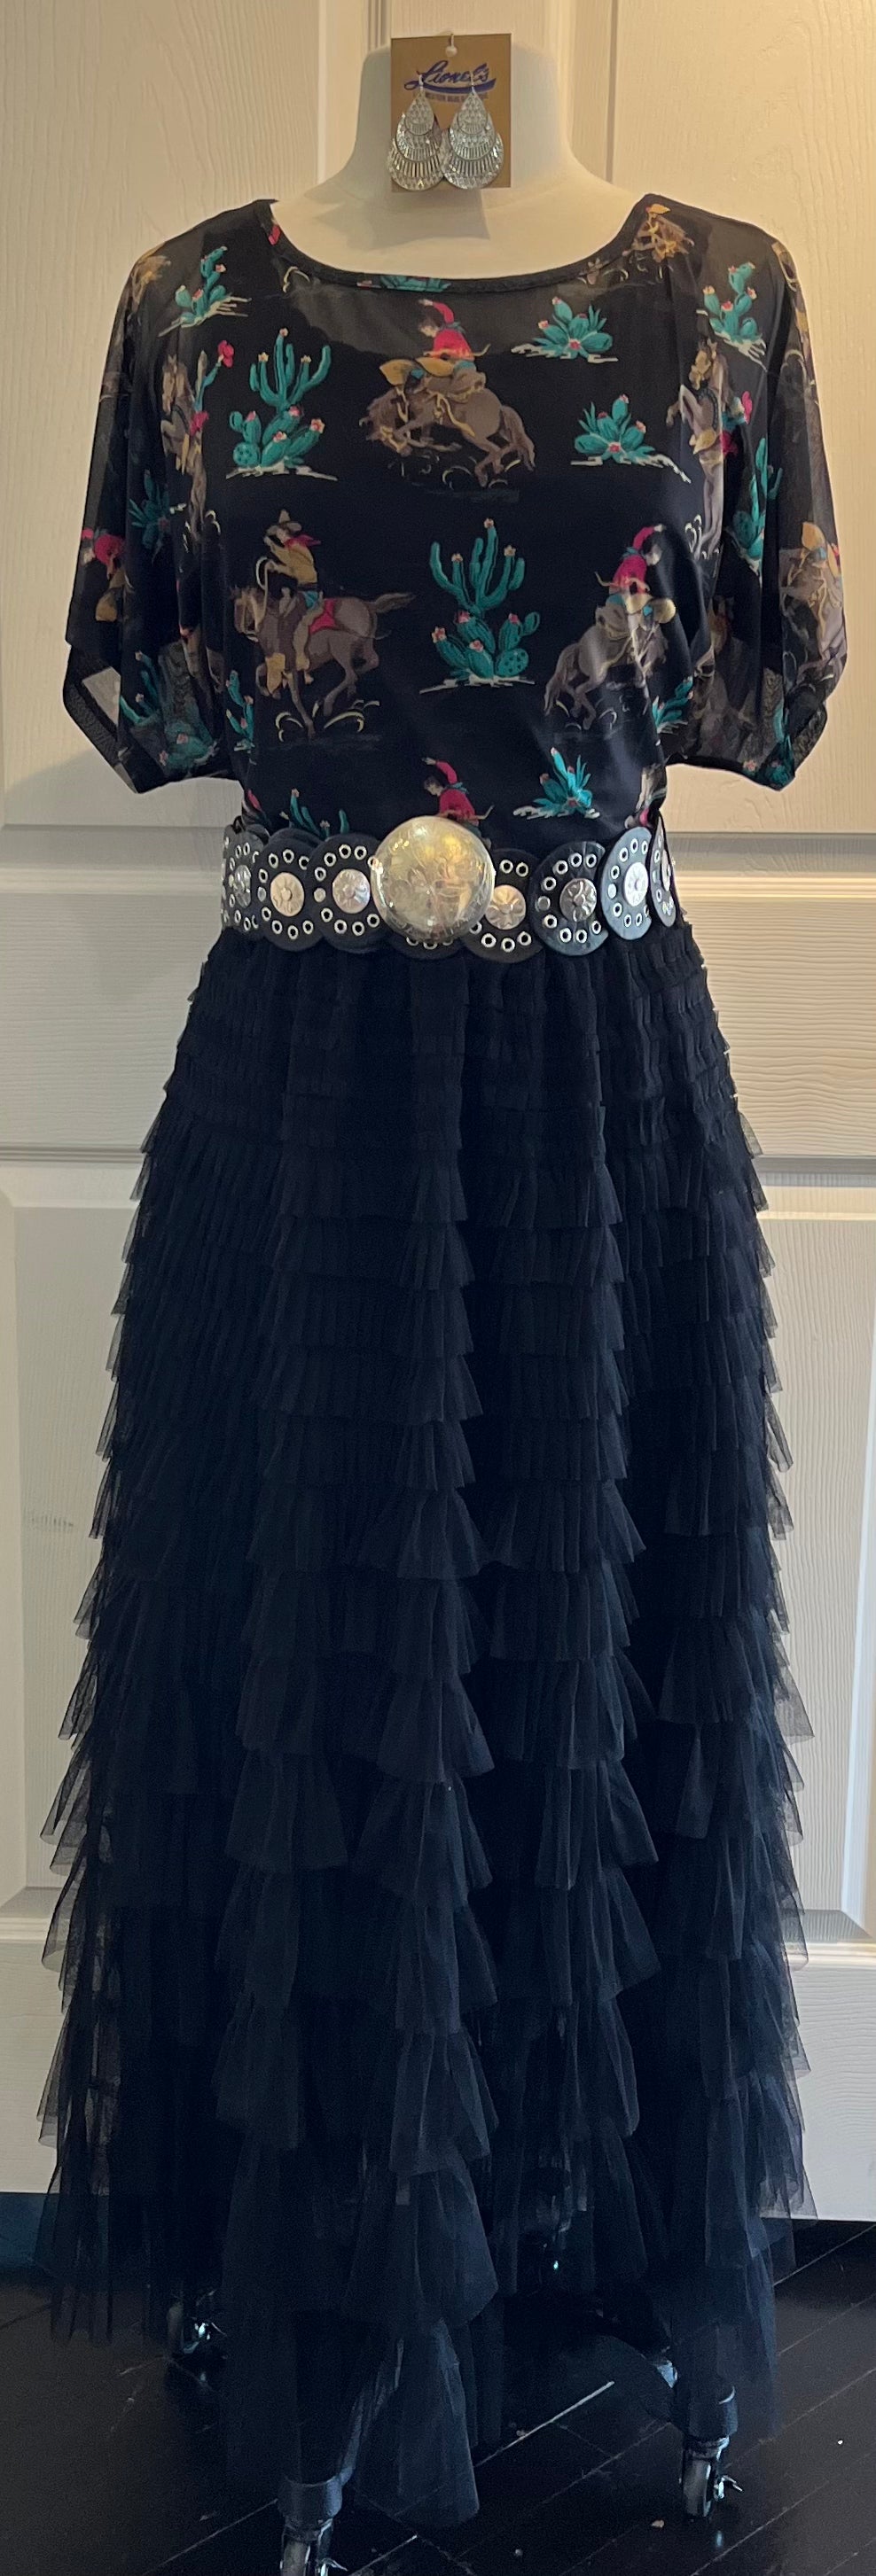 Black Tiered Ankle Length Tulle Skirt